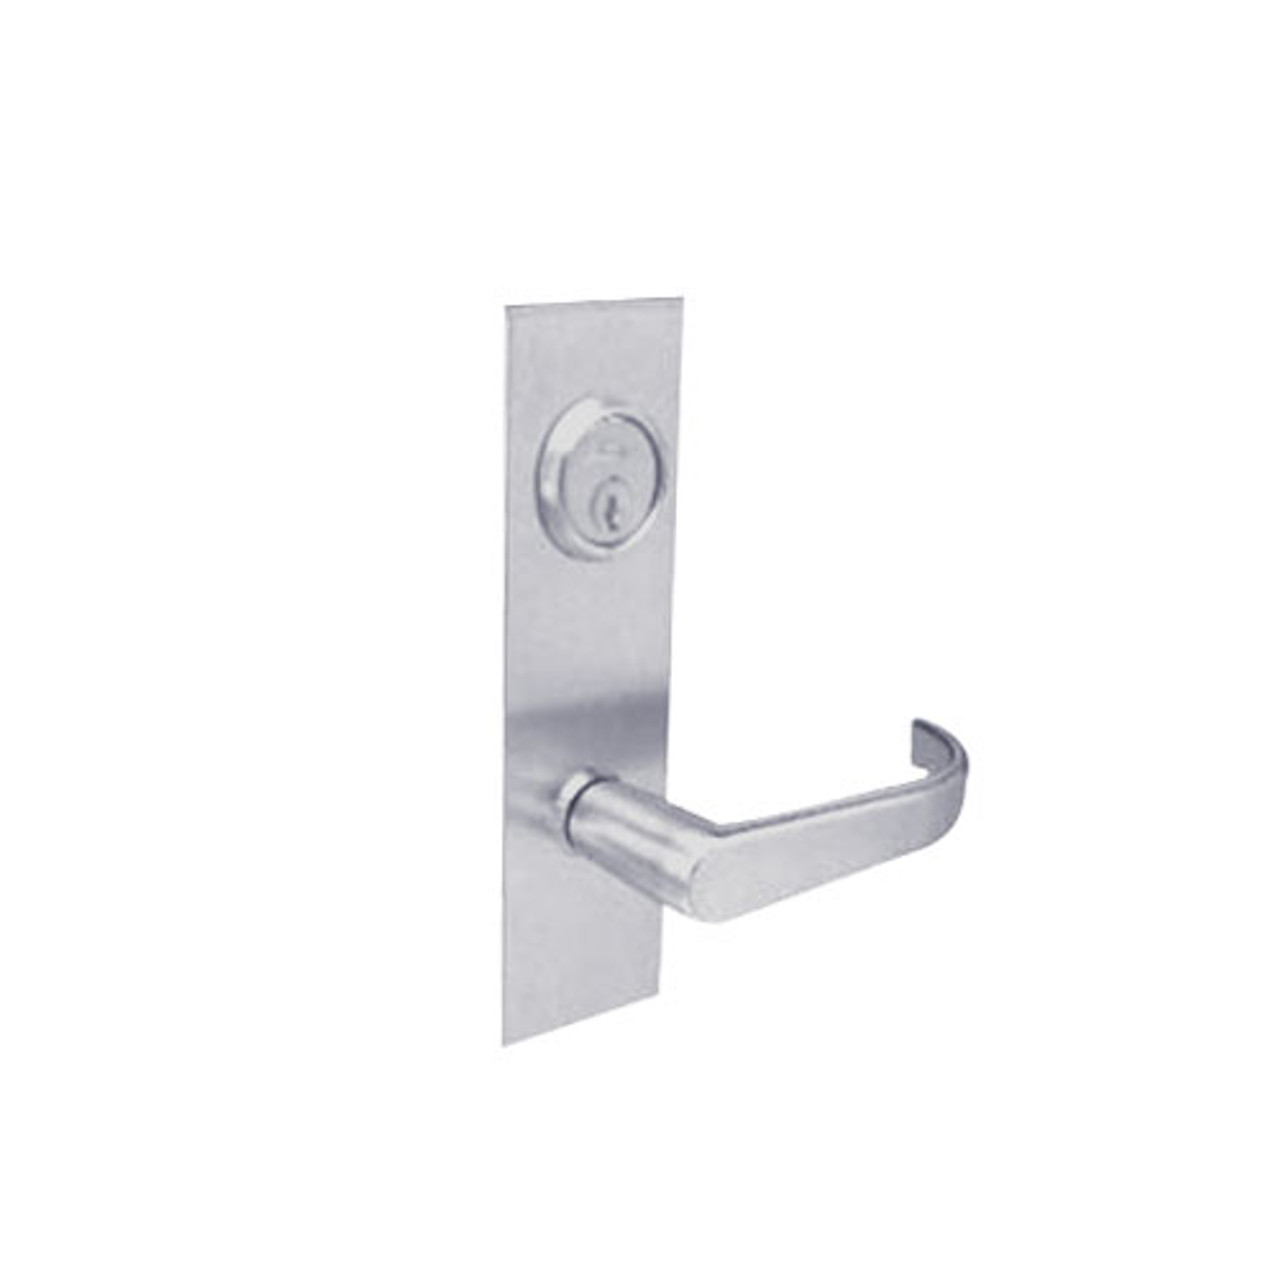 BM02-BRH-26D Arrow Mortise Lock BM Series Privacy Lever with Broadway Design and H Escutcheon in Satin Chrome